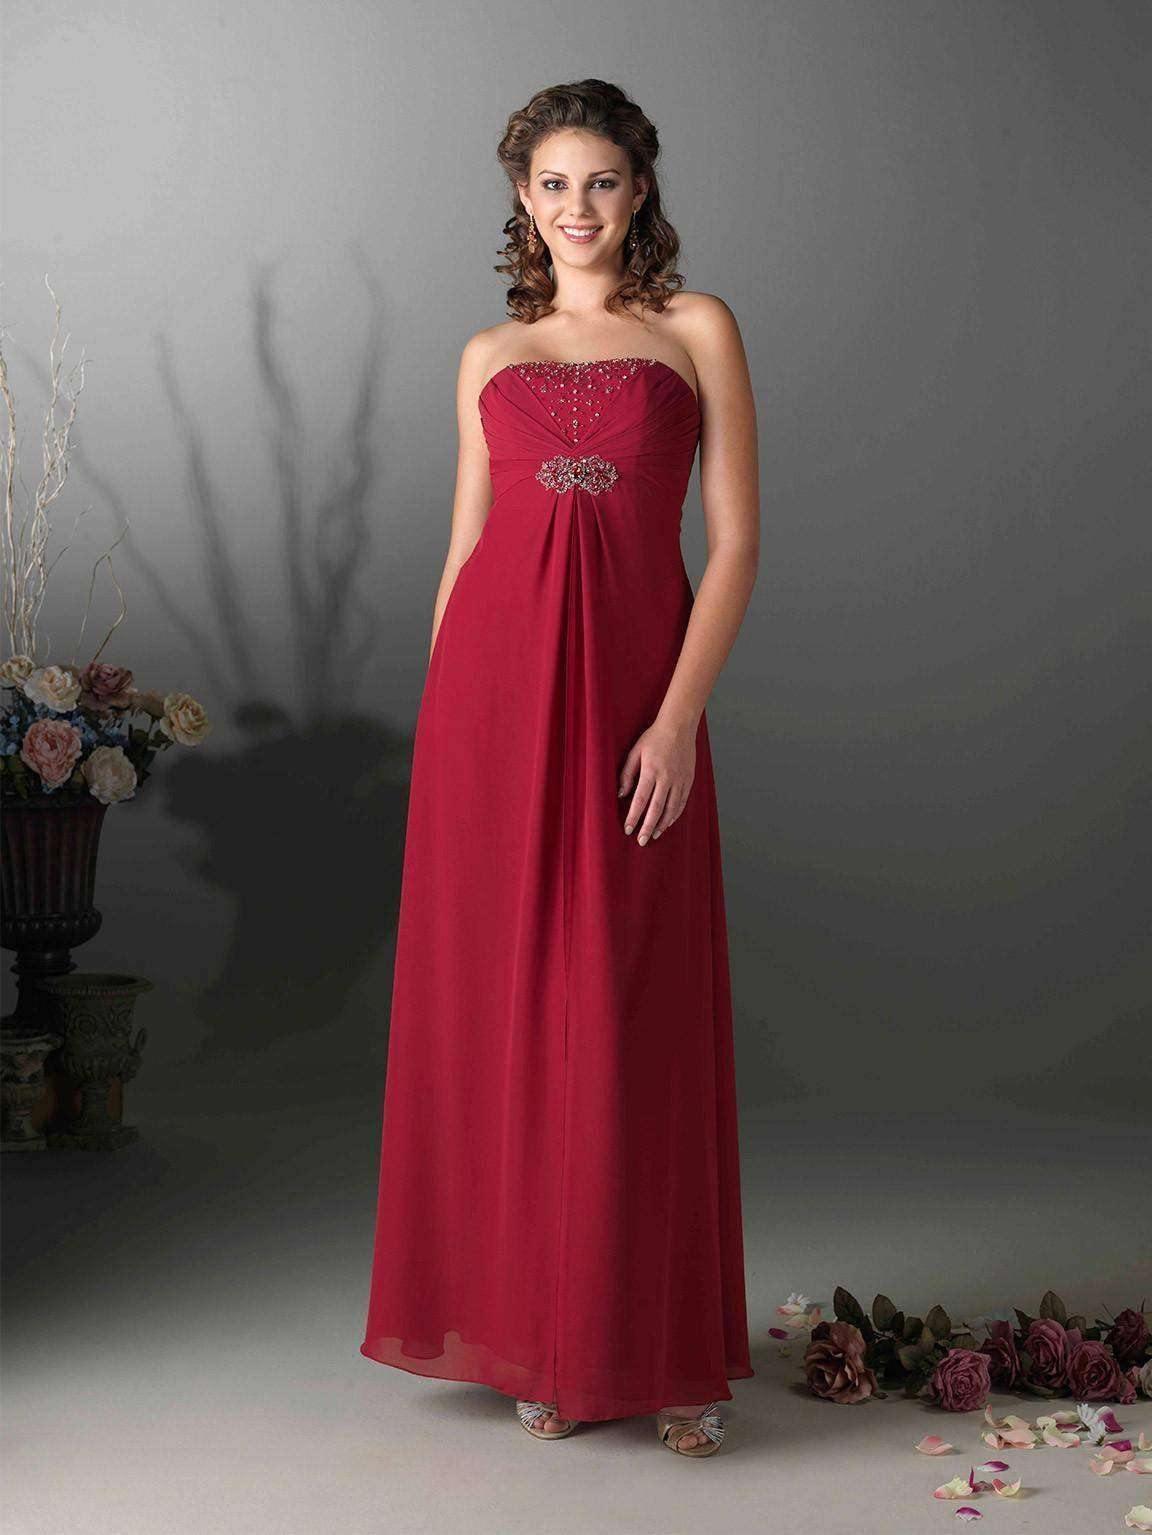 UK04 HOT RASPBERRY - KERRY - SALE - Adore Bridal and Occasion Wear